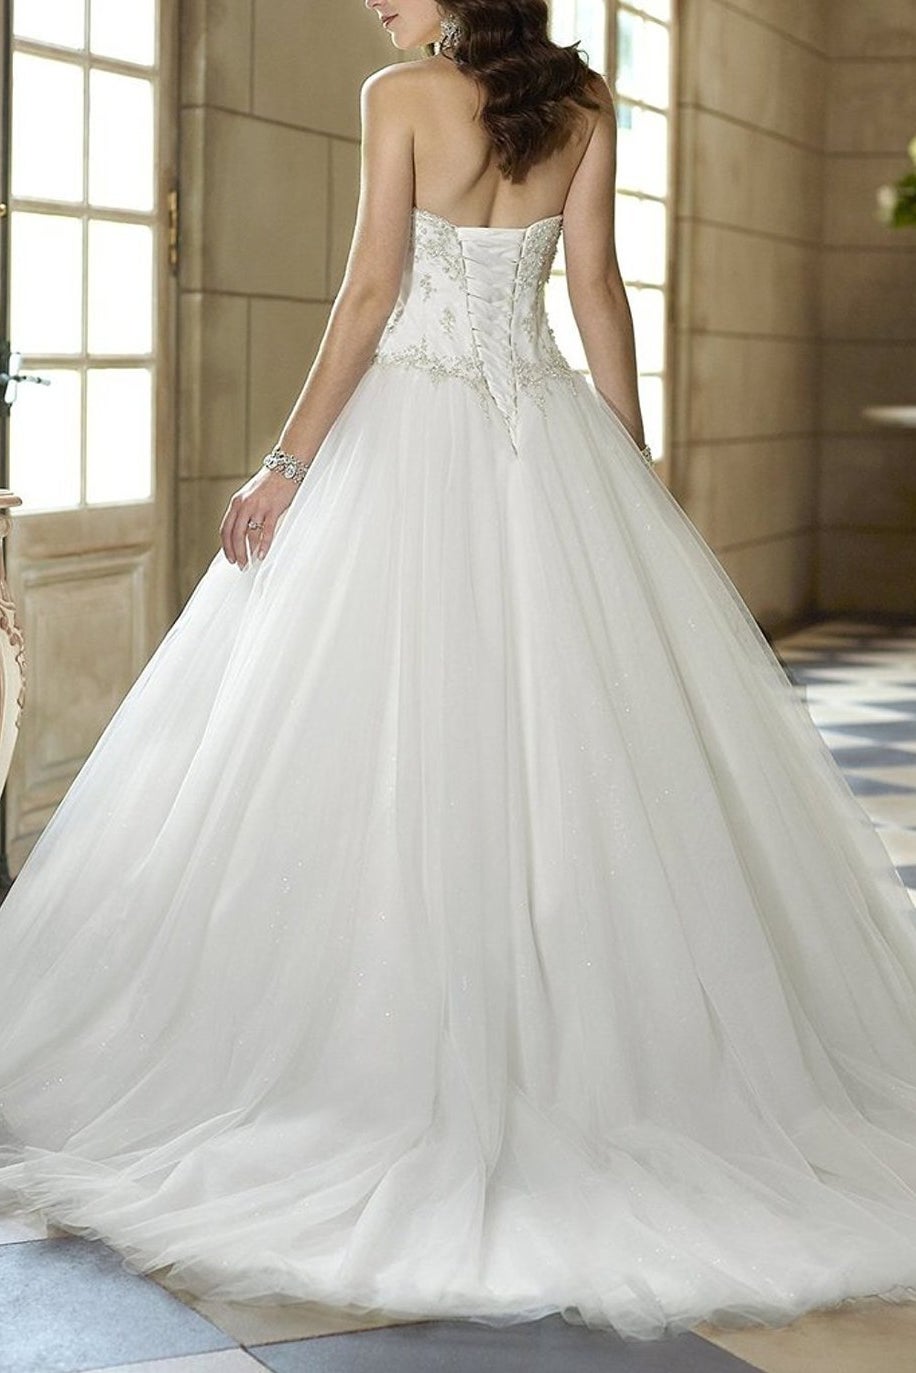 20 Wedding Dresses You Won't Believe You Can Get